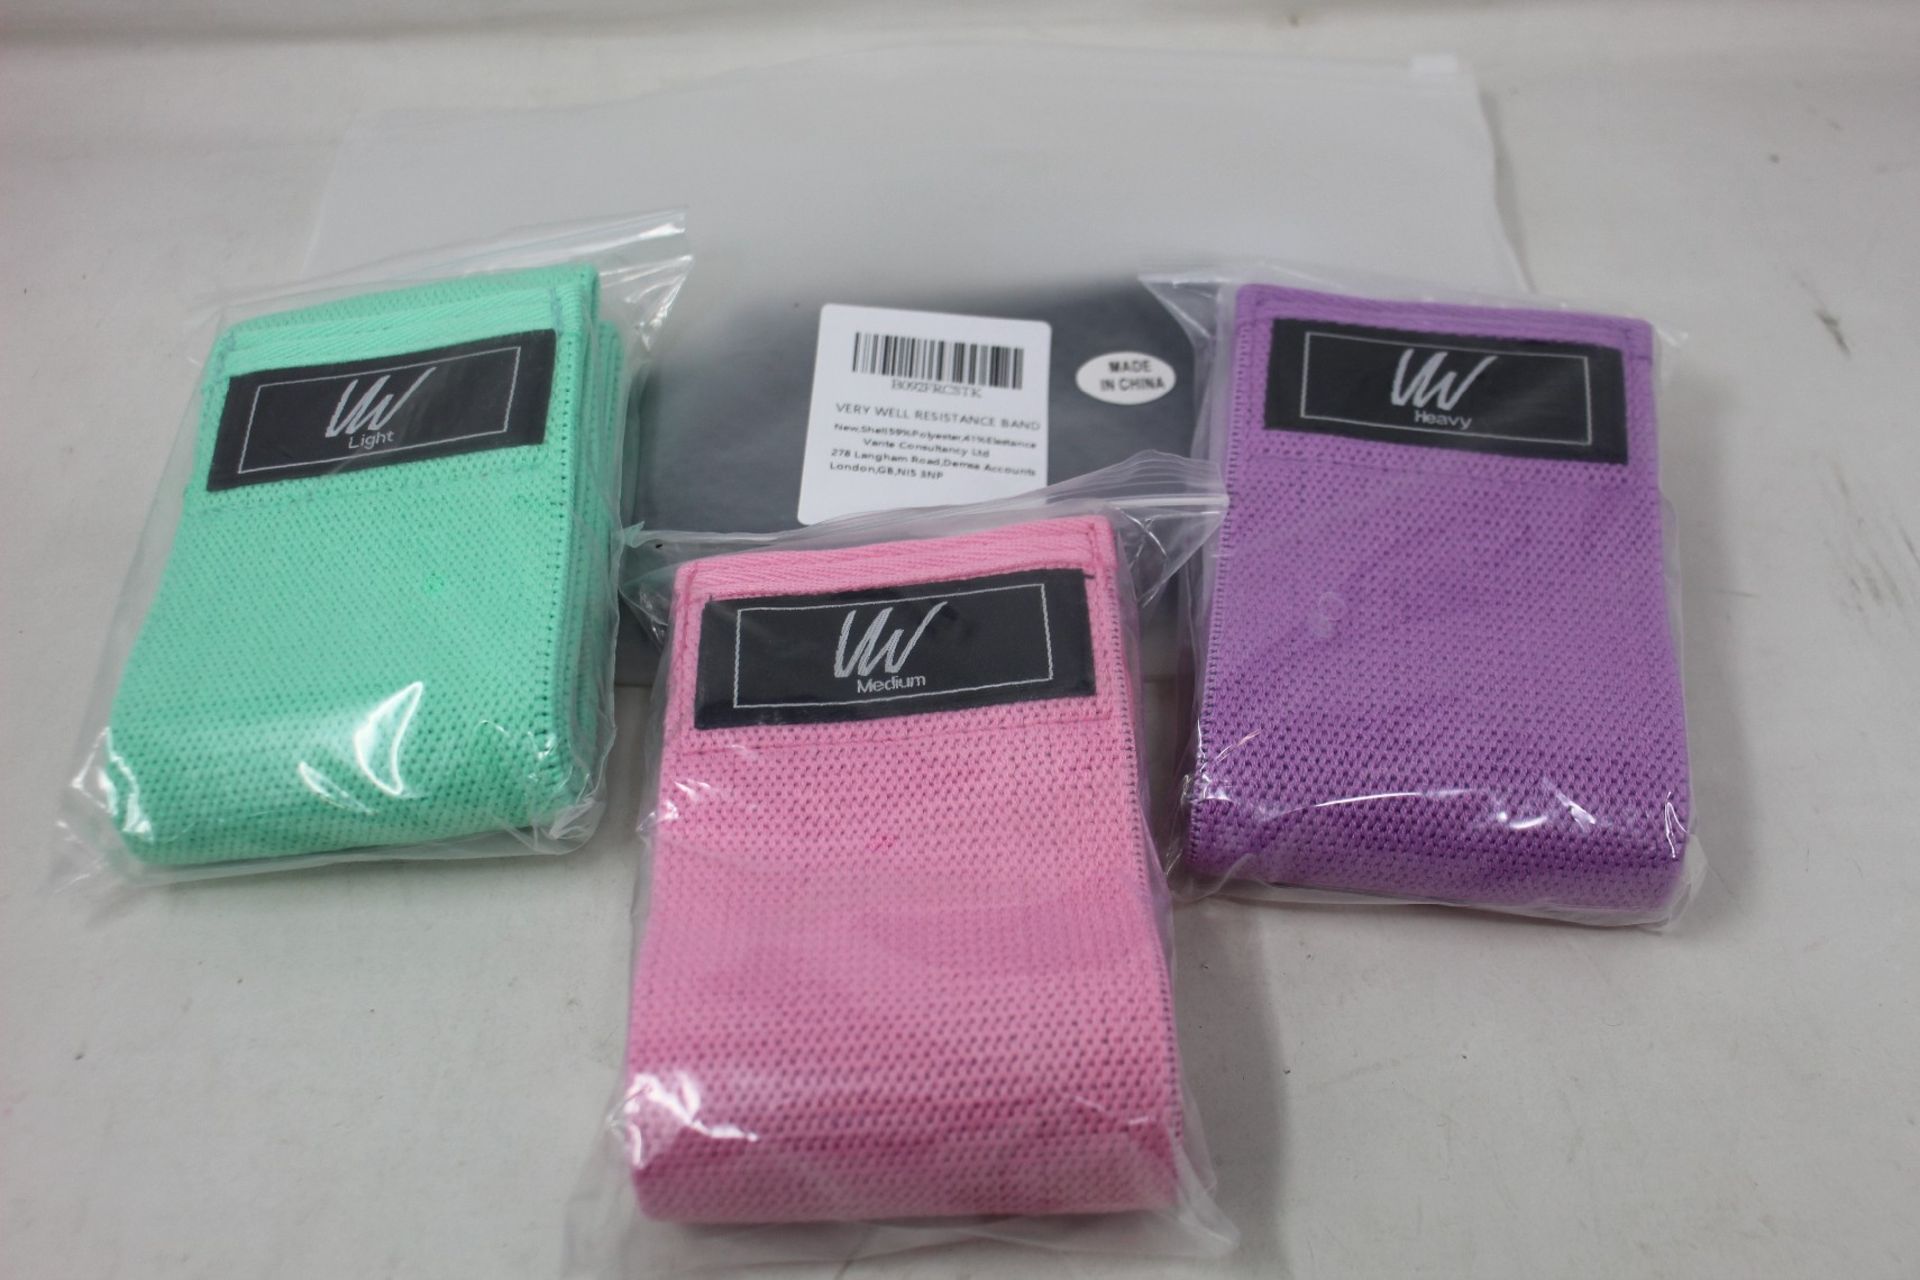 Ten packets of Very Well hip resistance bands (Three bands per packet).